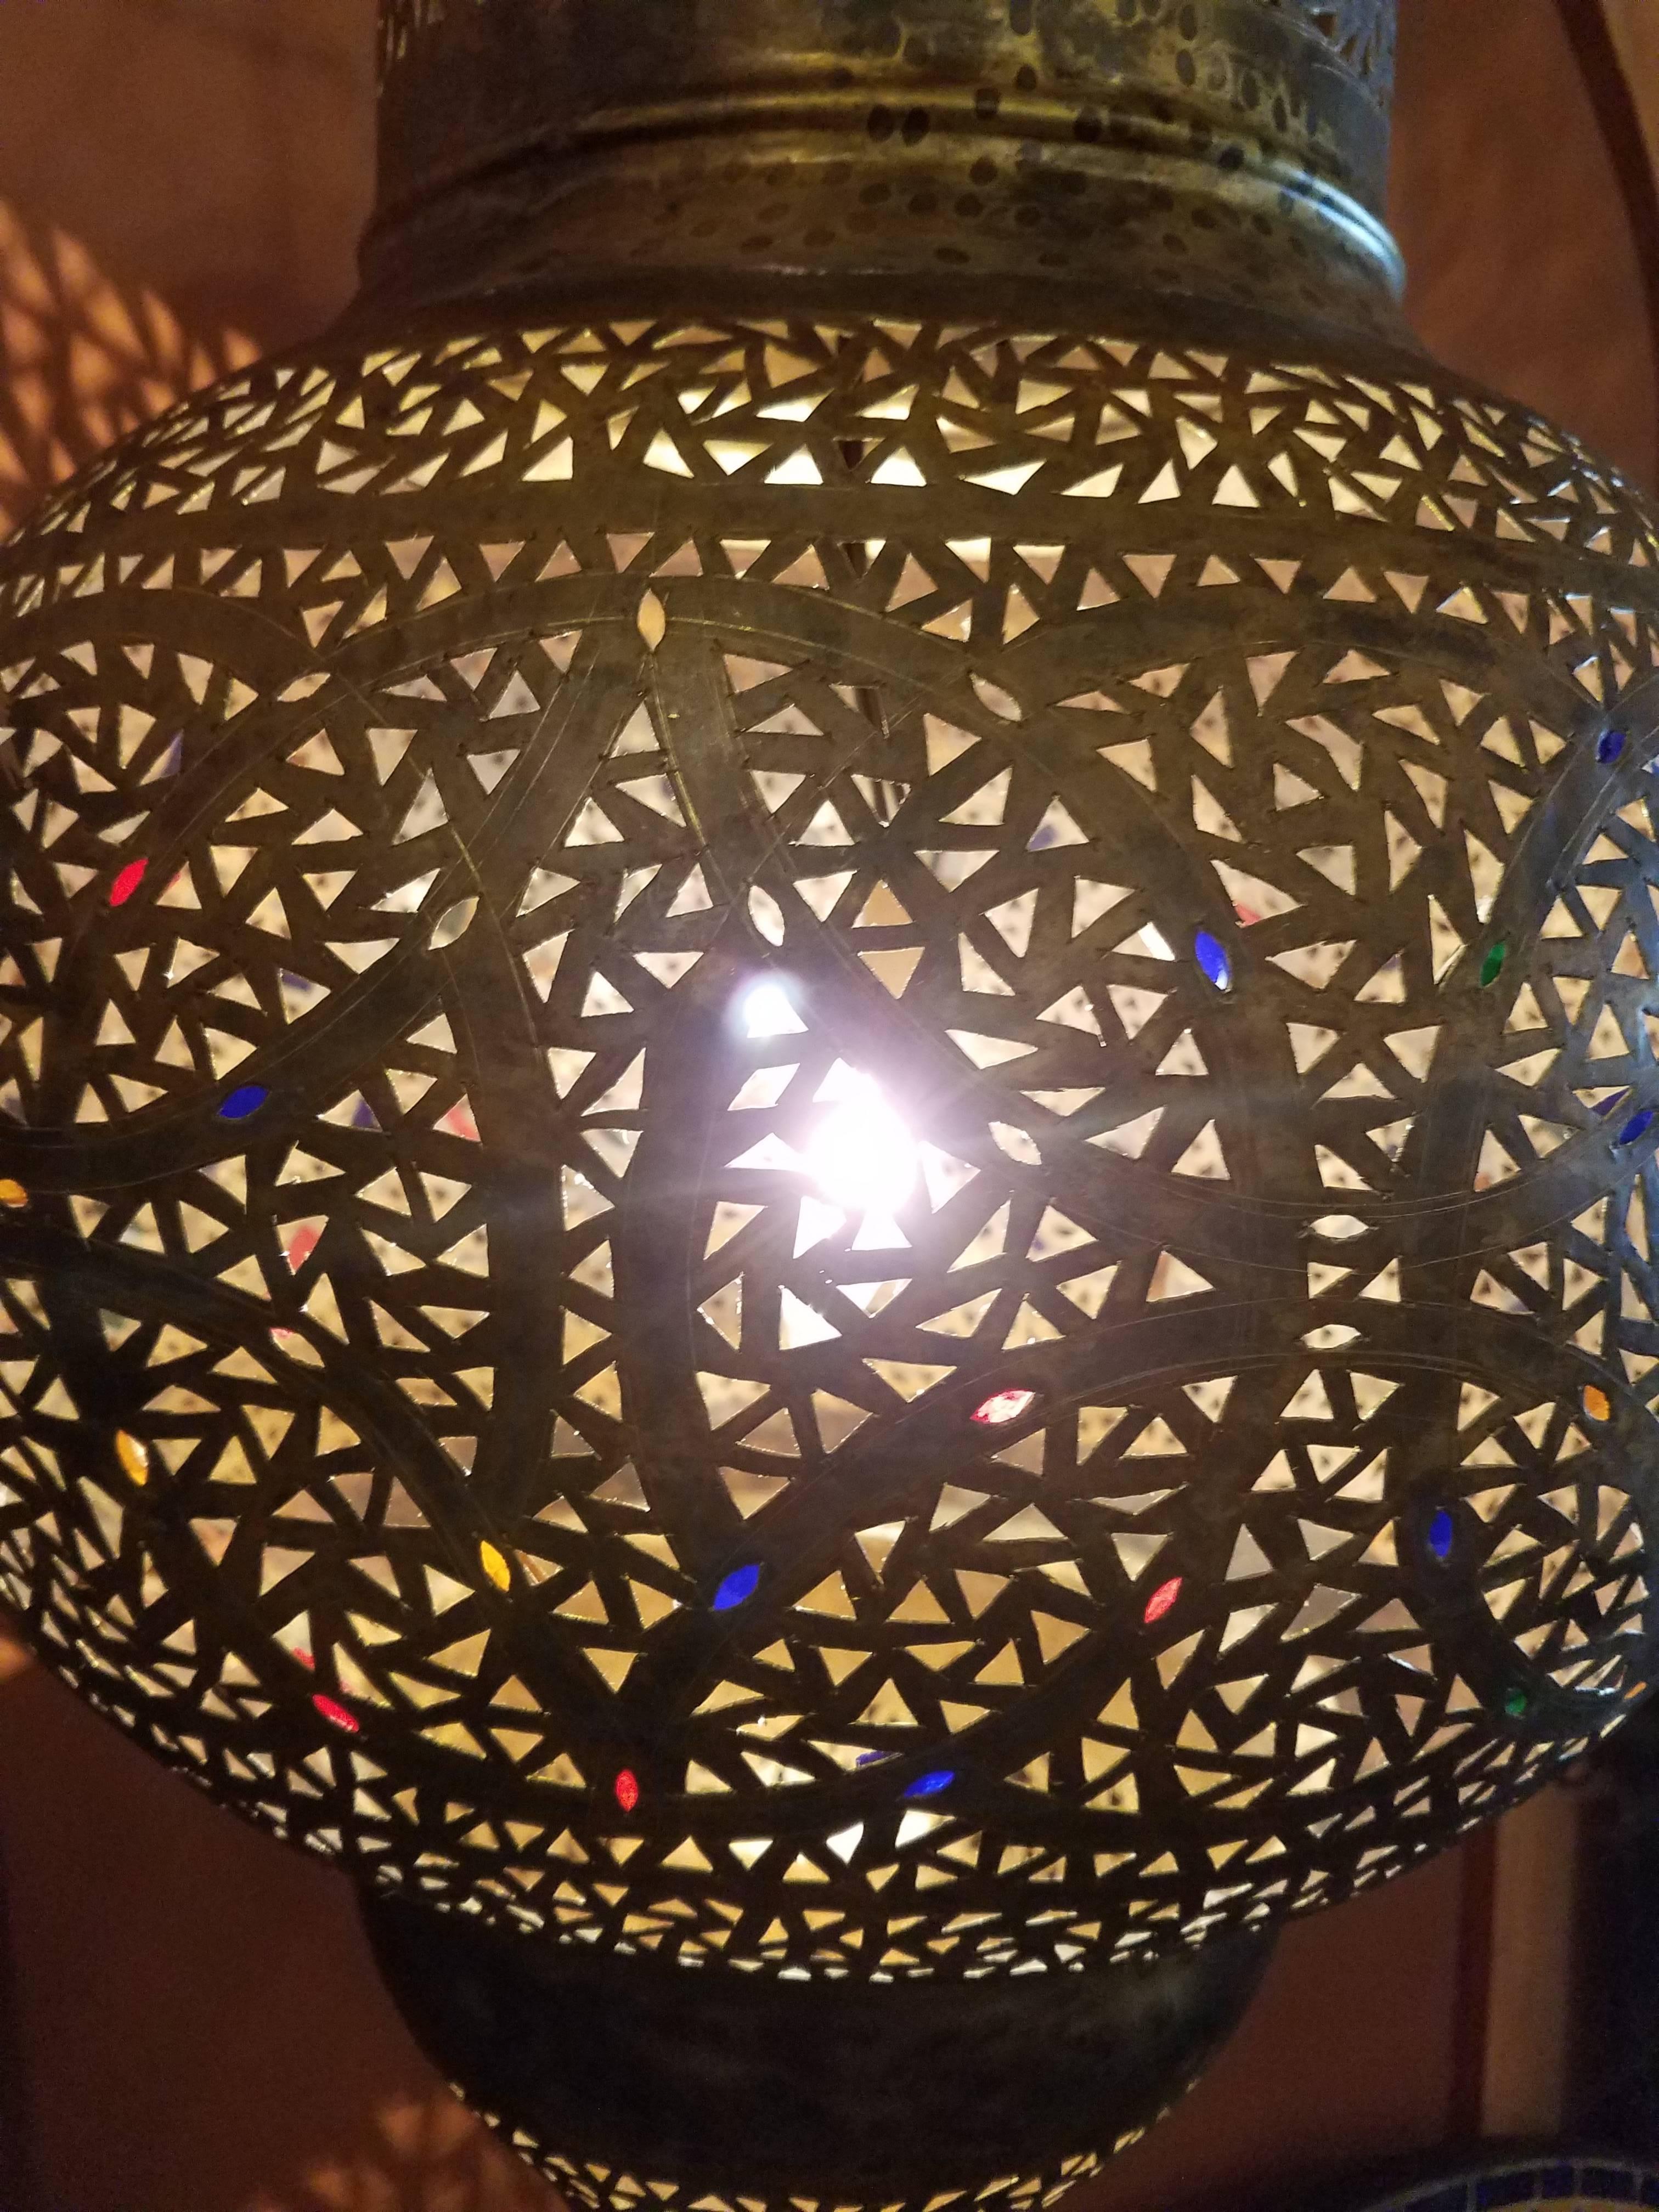 Made from pure copper, these beautiful Moroccan table lamps / lanterns are sure to be show-stoppers anywhere in your home. Each is handmade using ancient artisan methods which consist of puncturing the surface with a unique, elaborate design, so